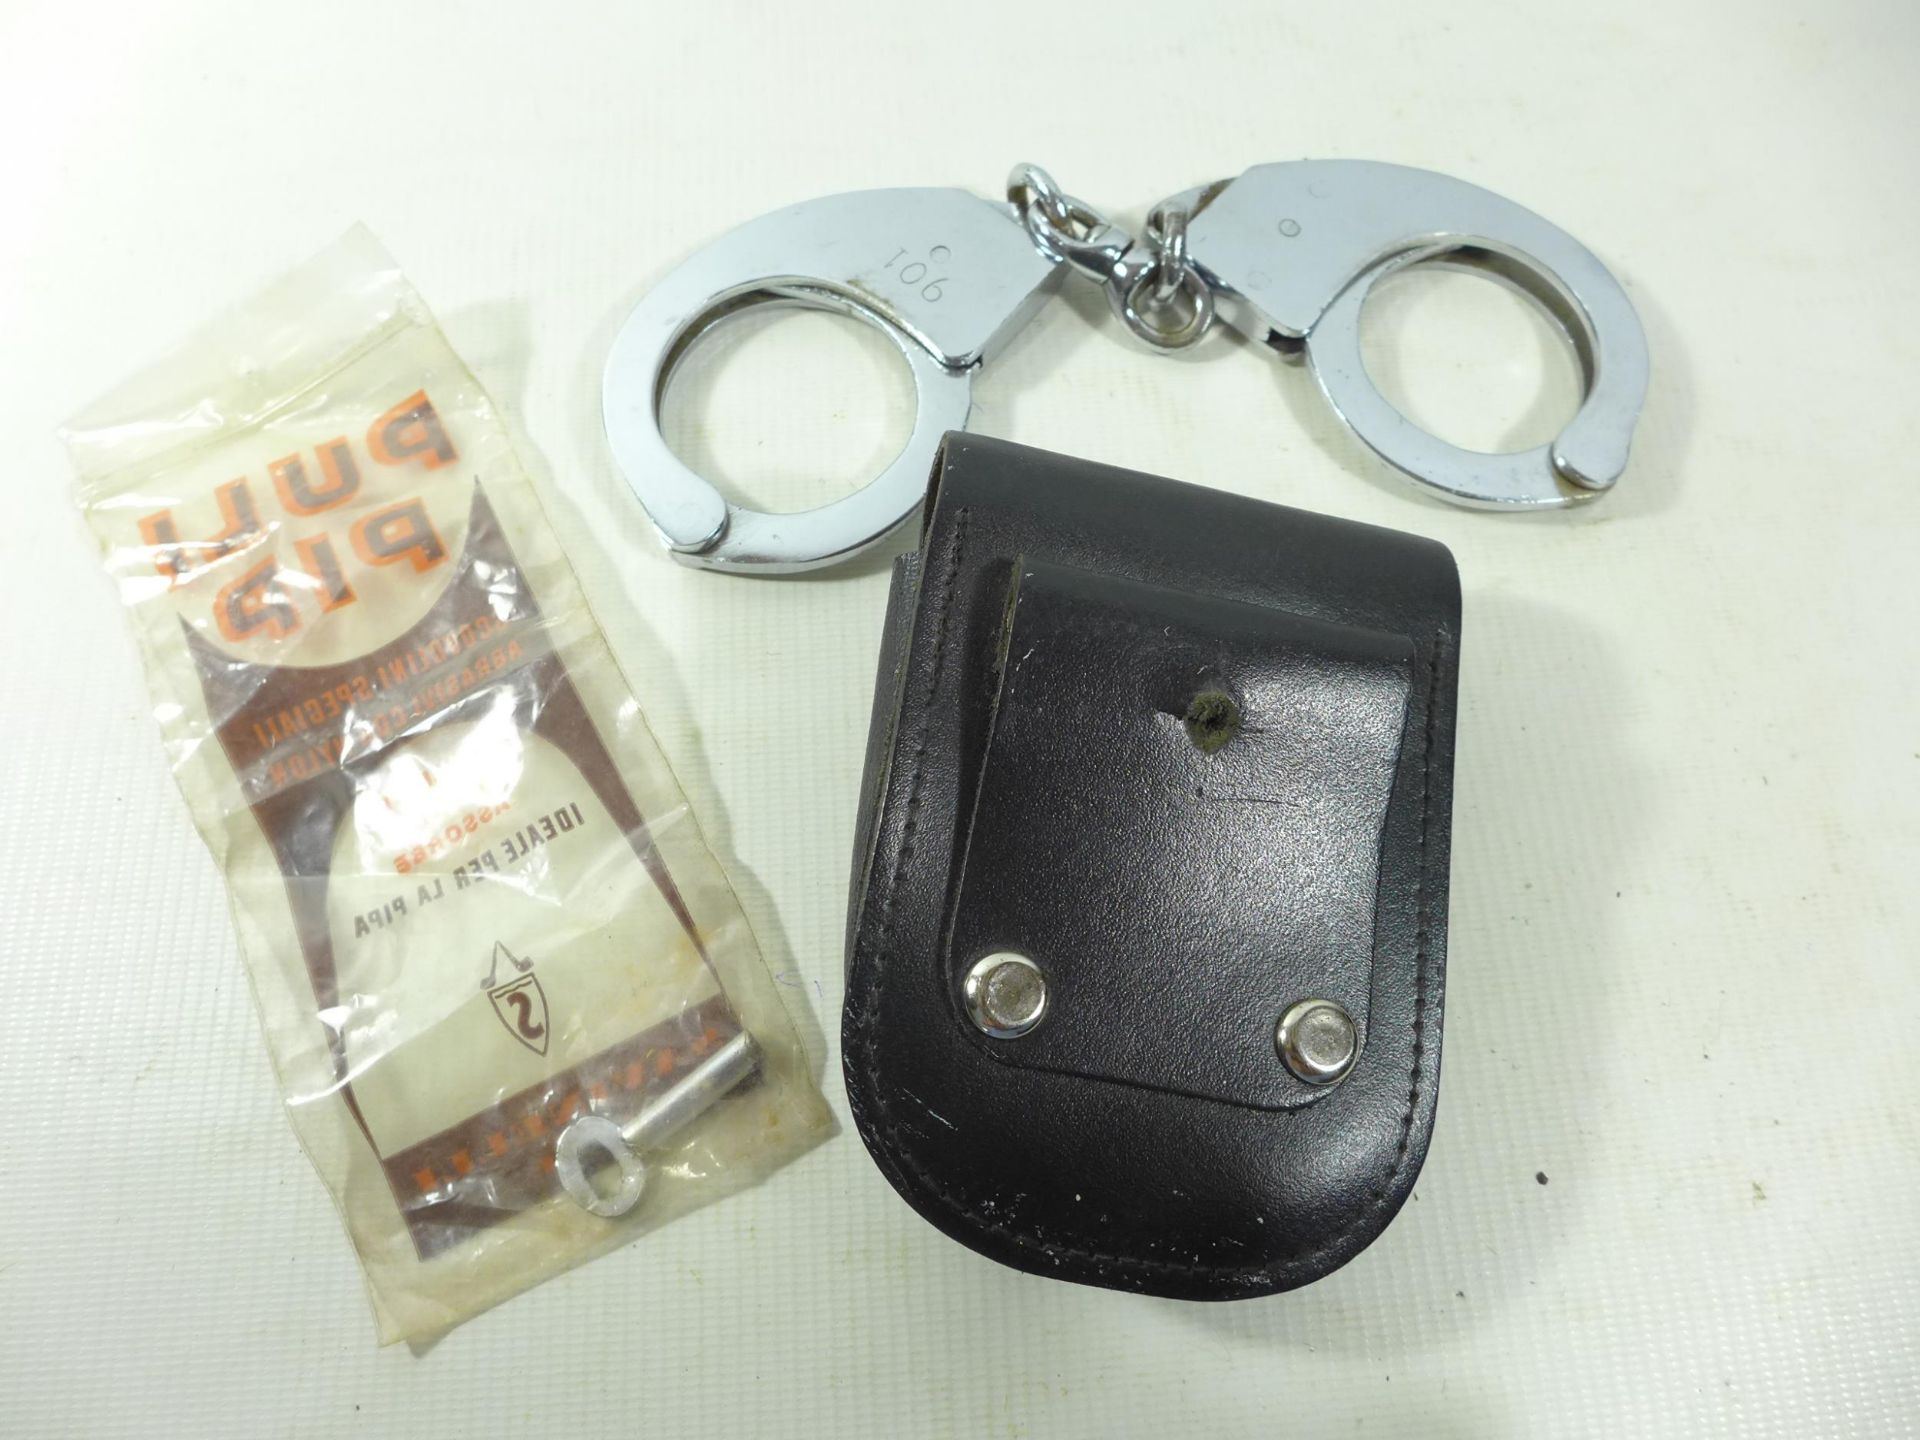 A PAIR OF HANDCUFFS, KEY AND POUCH - Image 2 of 7